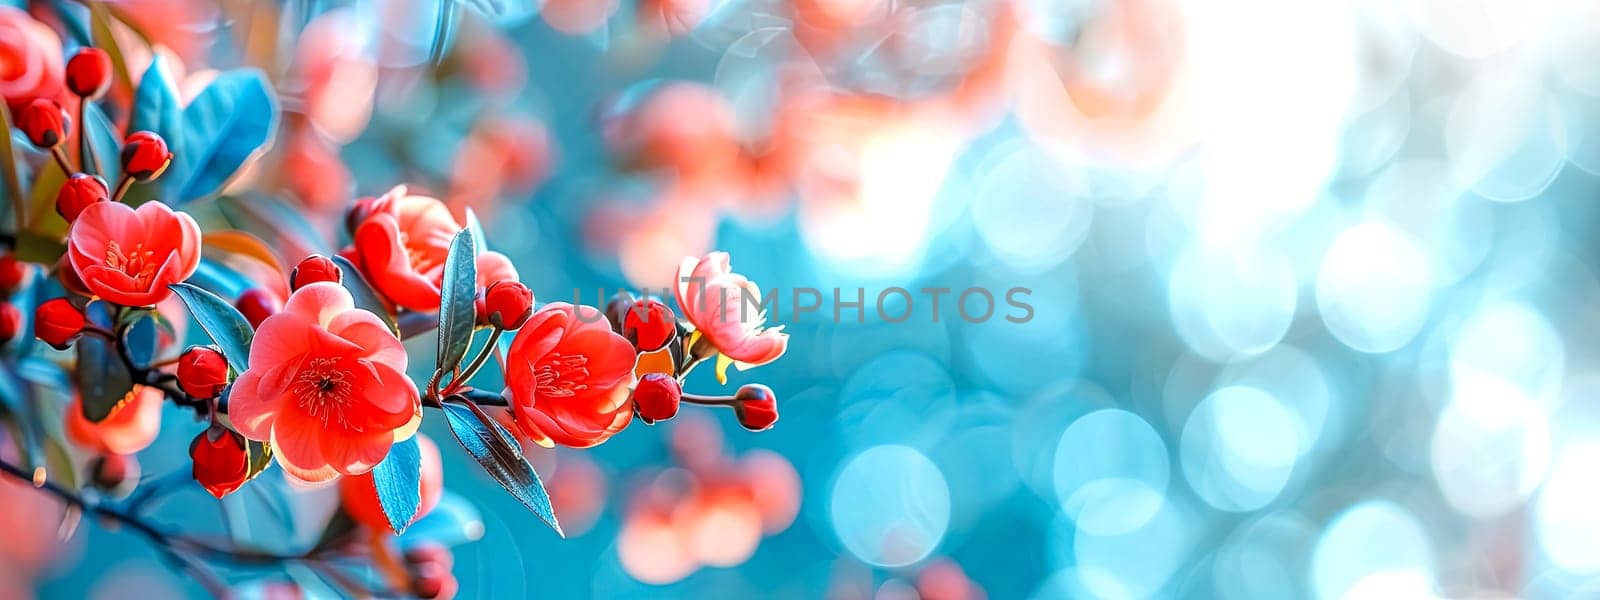 A tree branch with red flowers and berries on a blue background, copy space by Edophoto